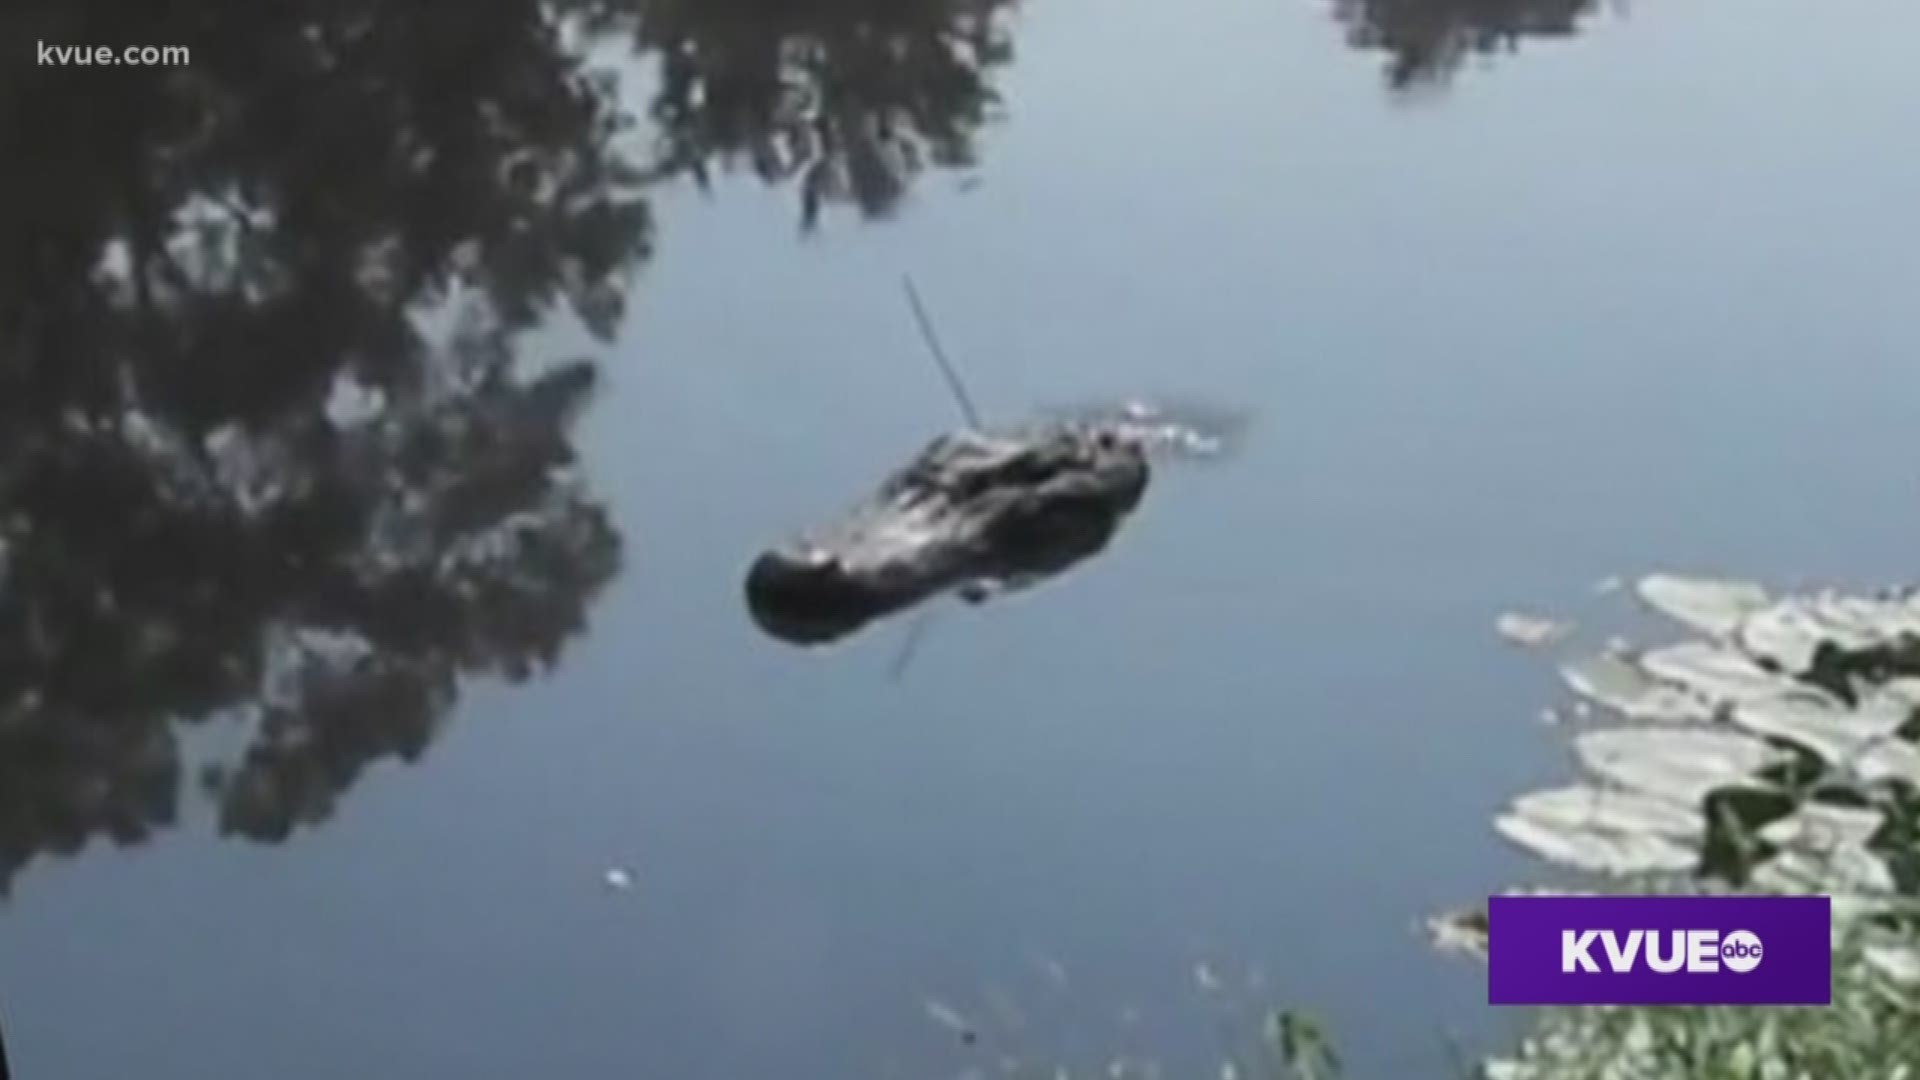 A video online shows what looks like an alligator swimming in the Comal and Guadalupe rivers, but police say there is nothing to fear.